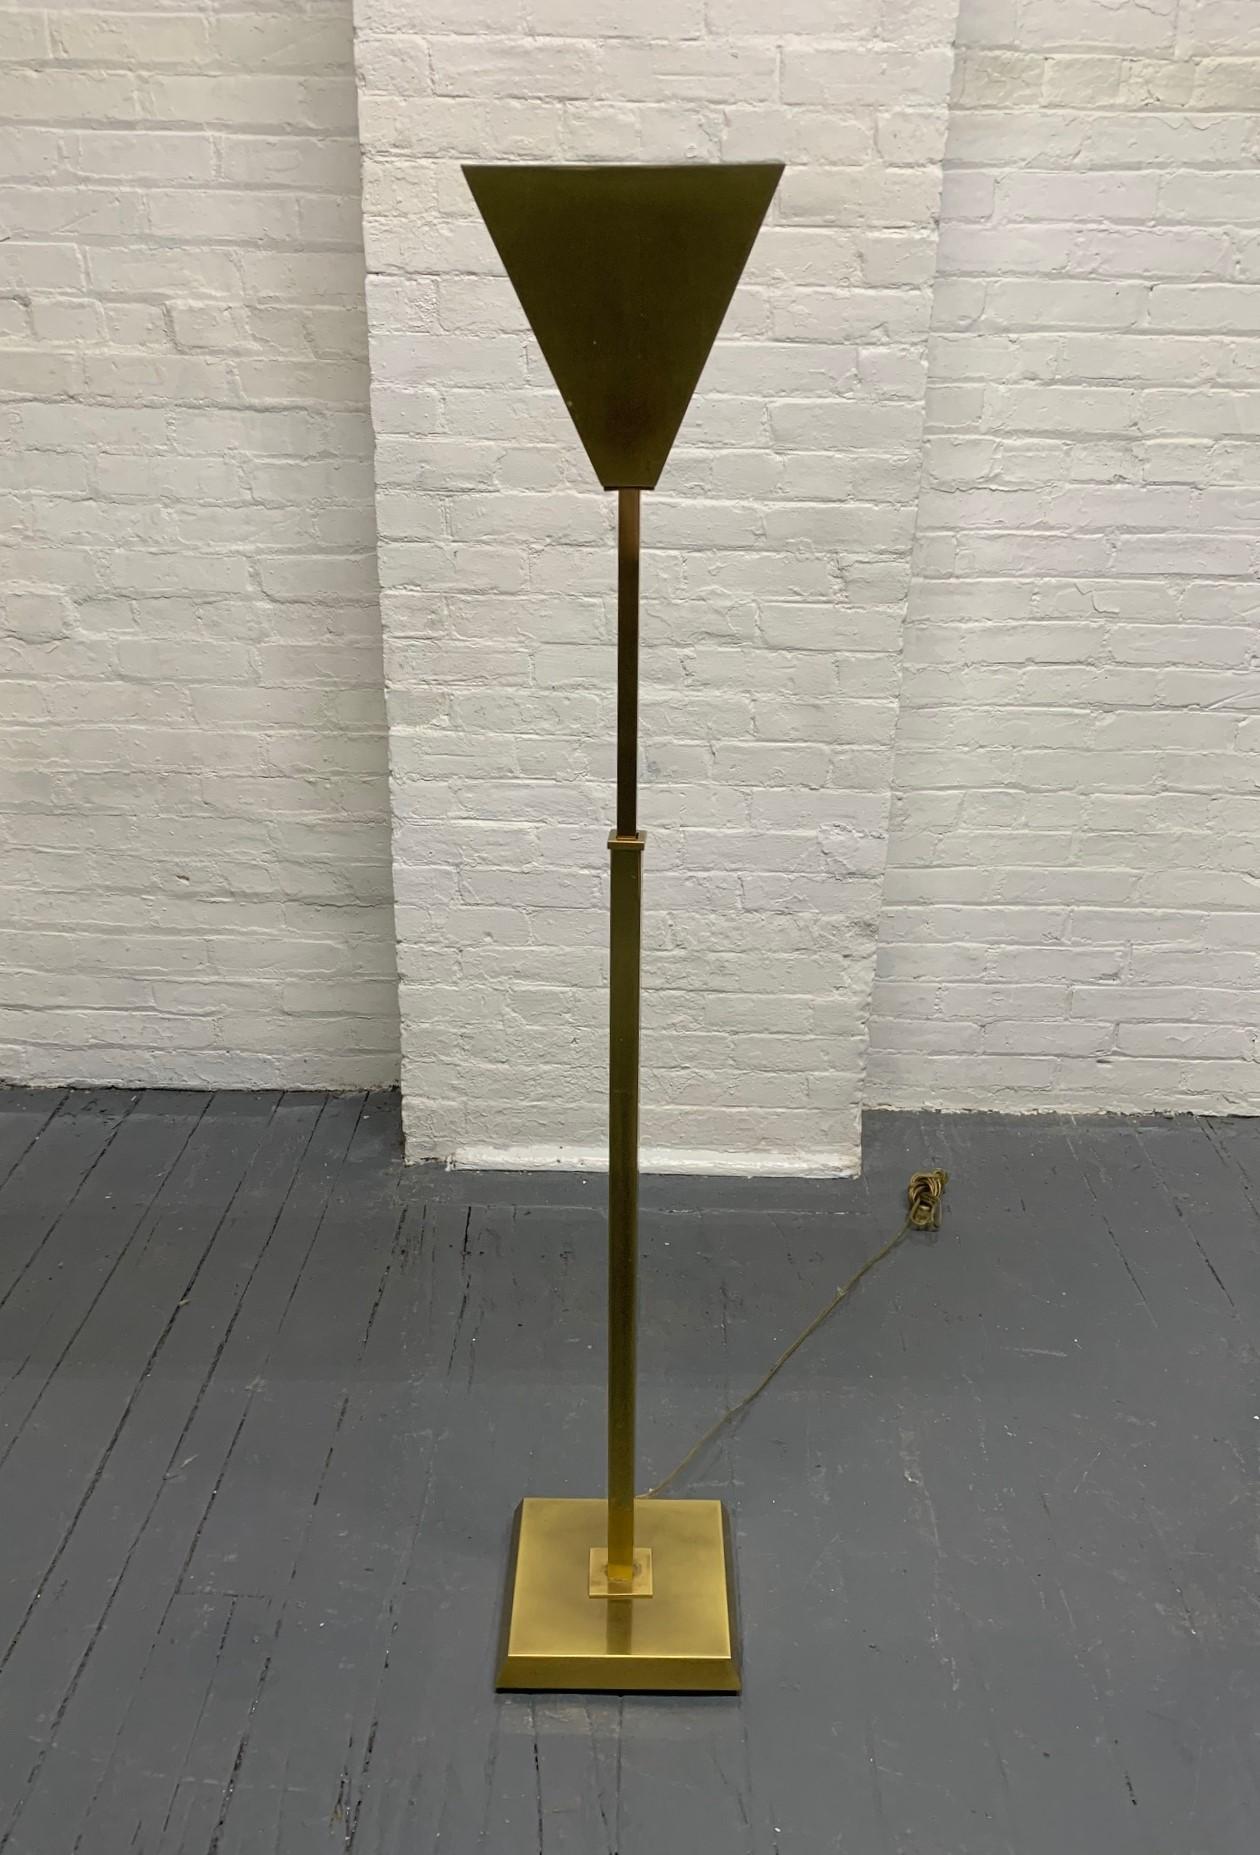 Adjustable brass torchère lamp by Nessen.
Ranges in height from 52